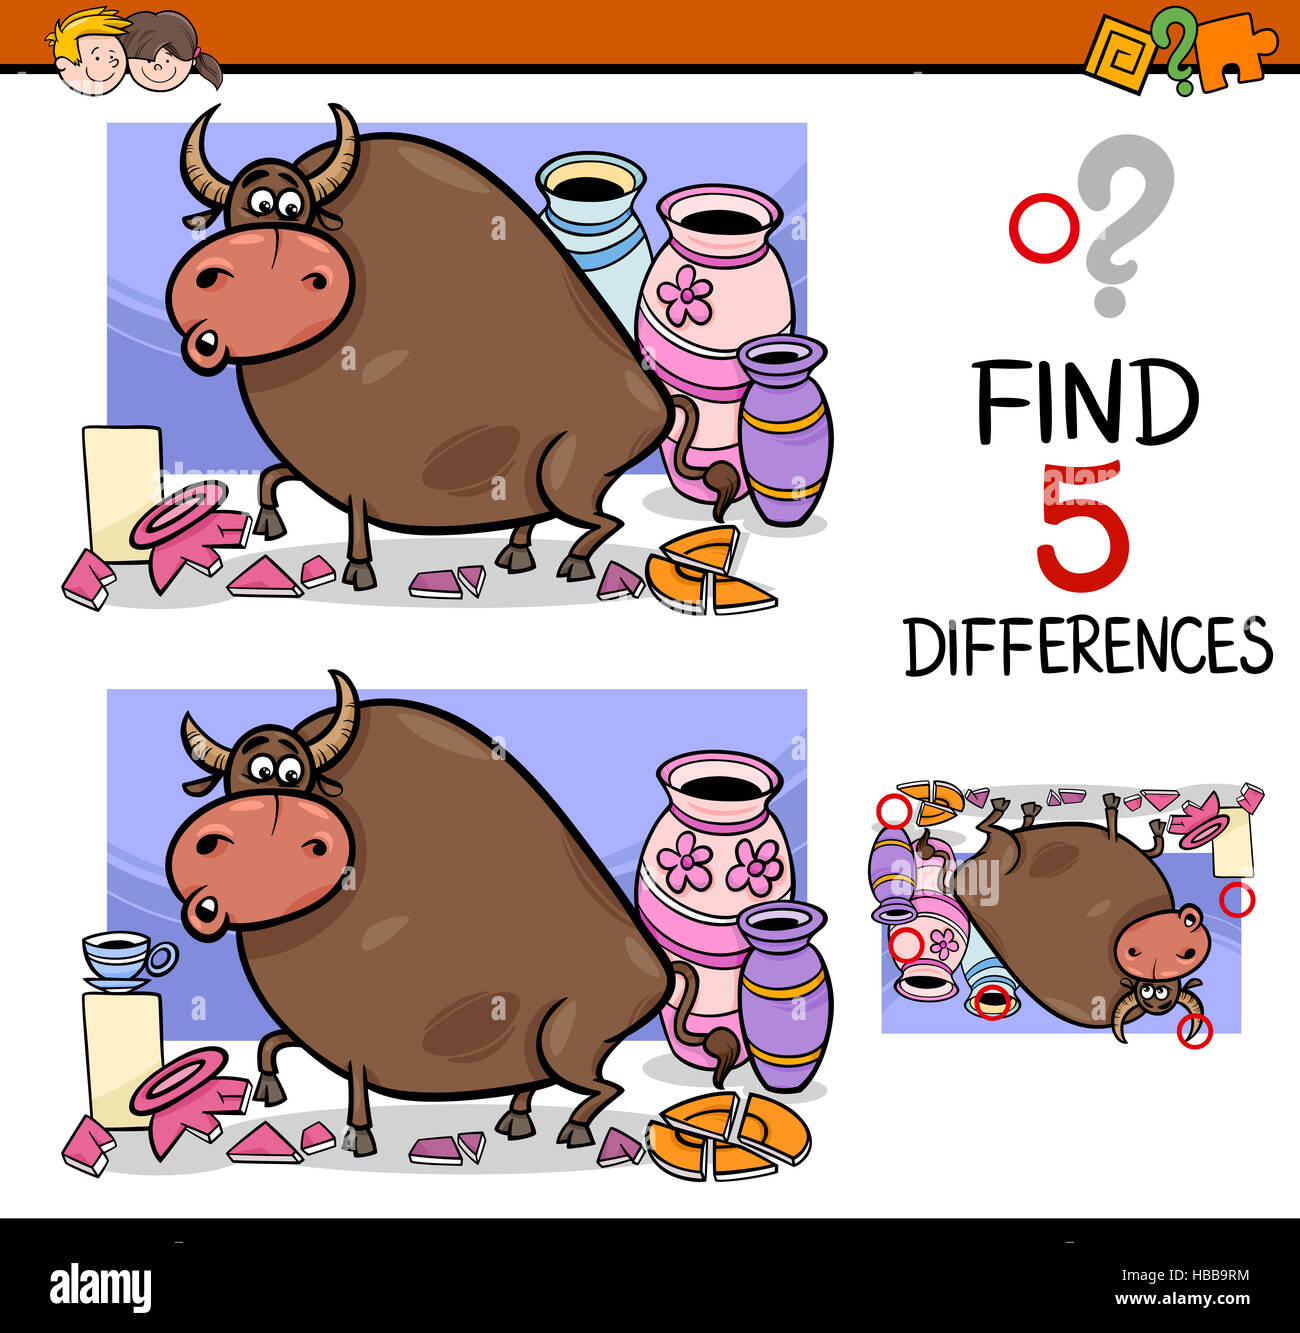 differences activity for kids Stock Photo